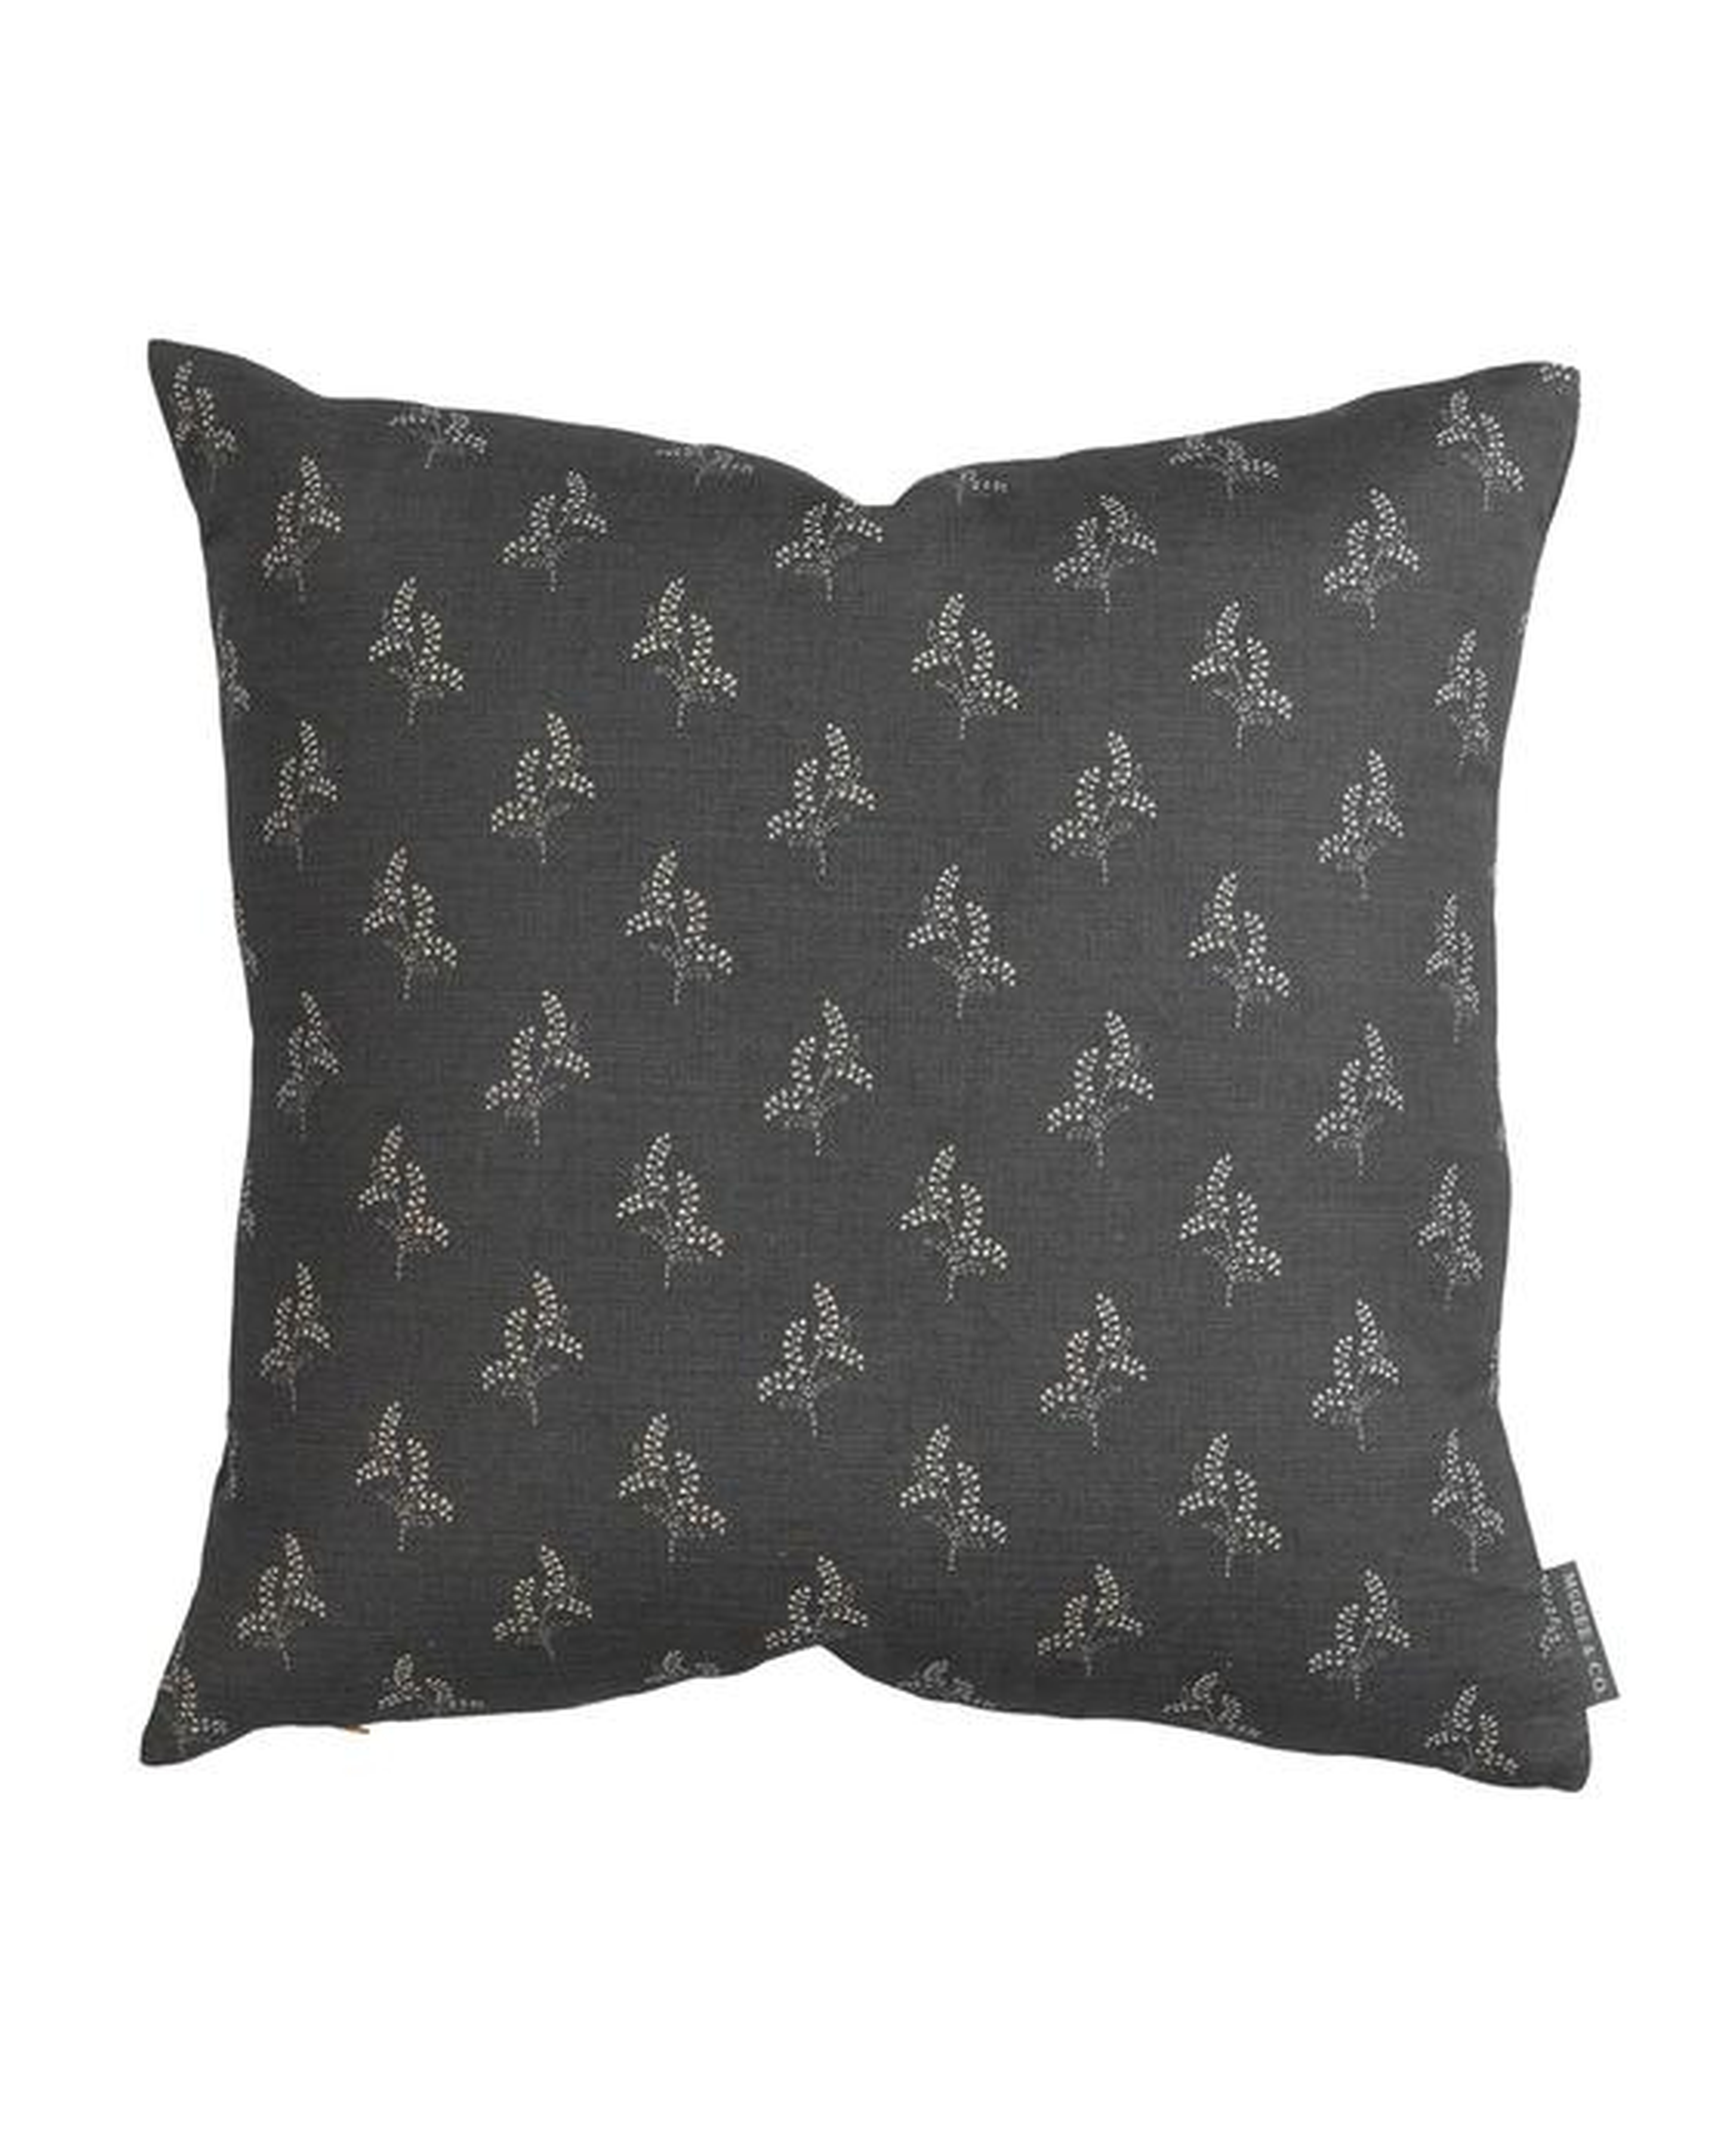 Gracie Block Print Pillow Cover, 24" x 24" - McGee & Co.